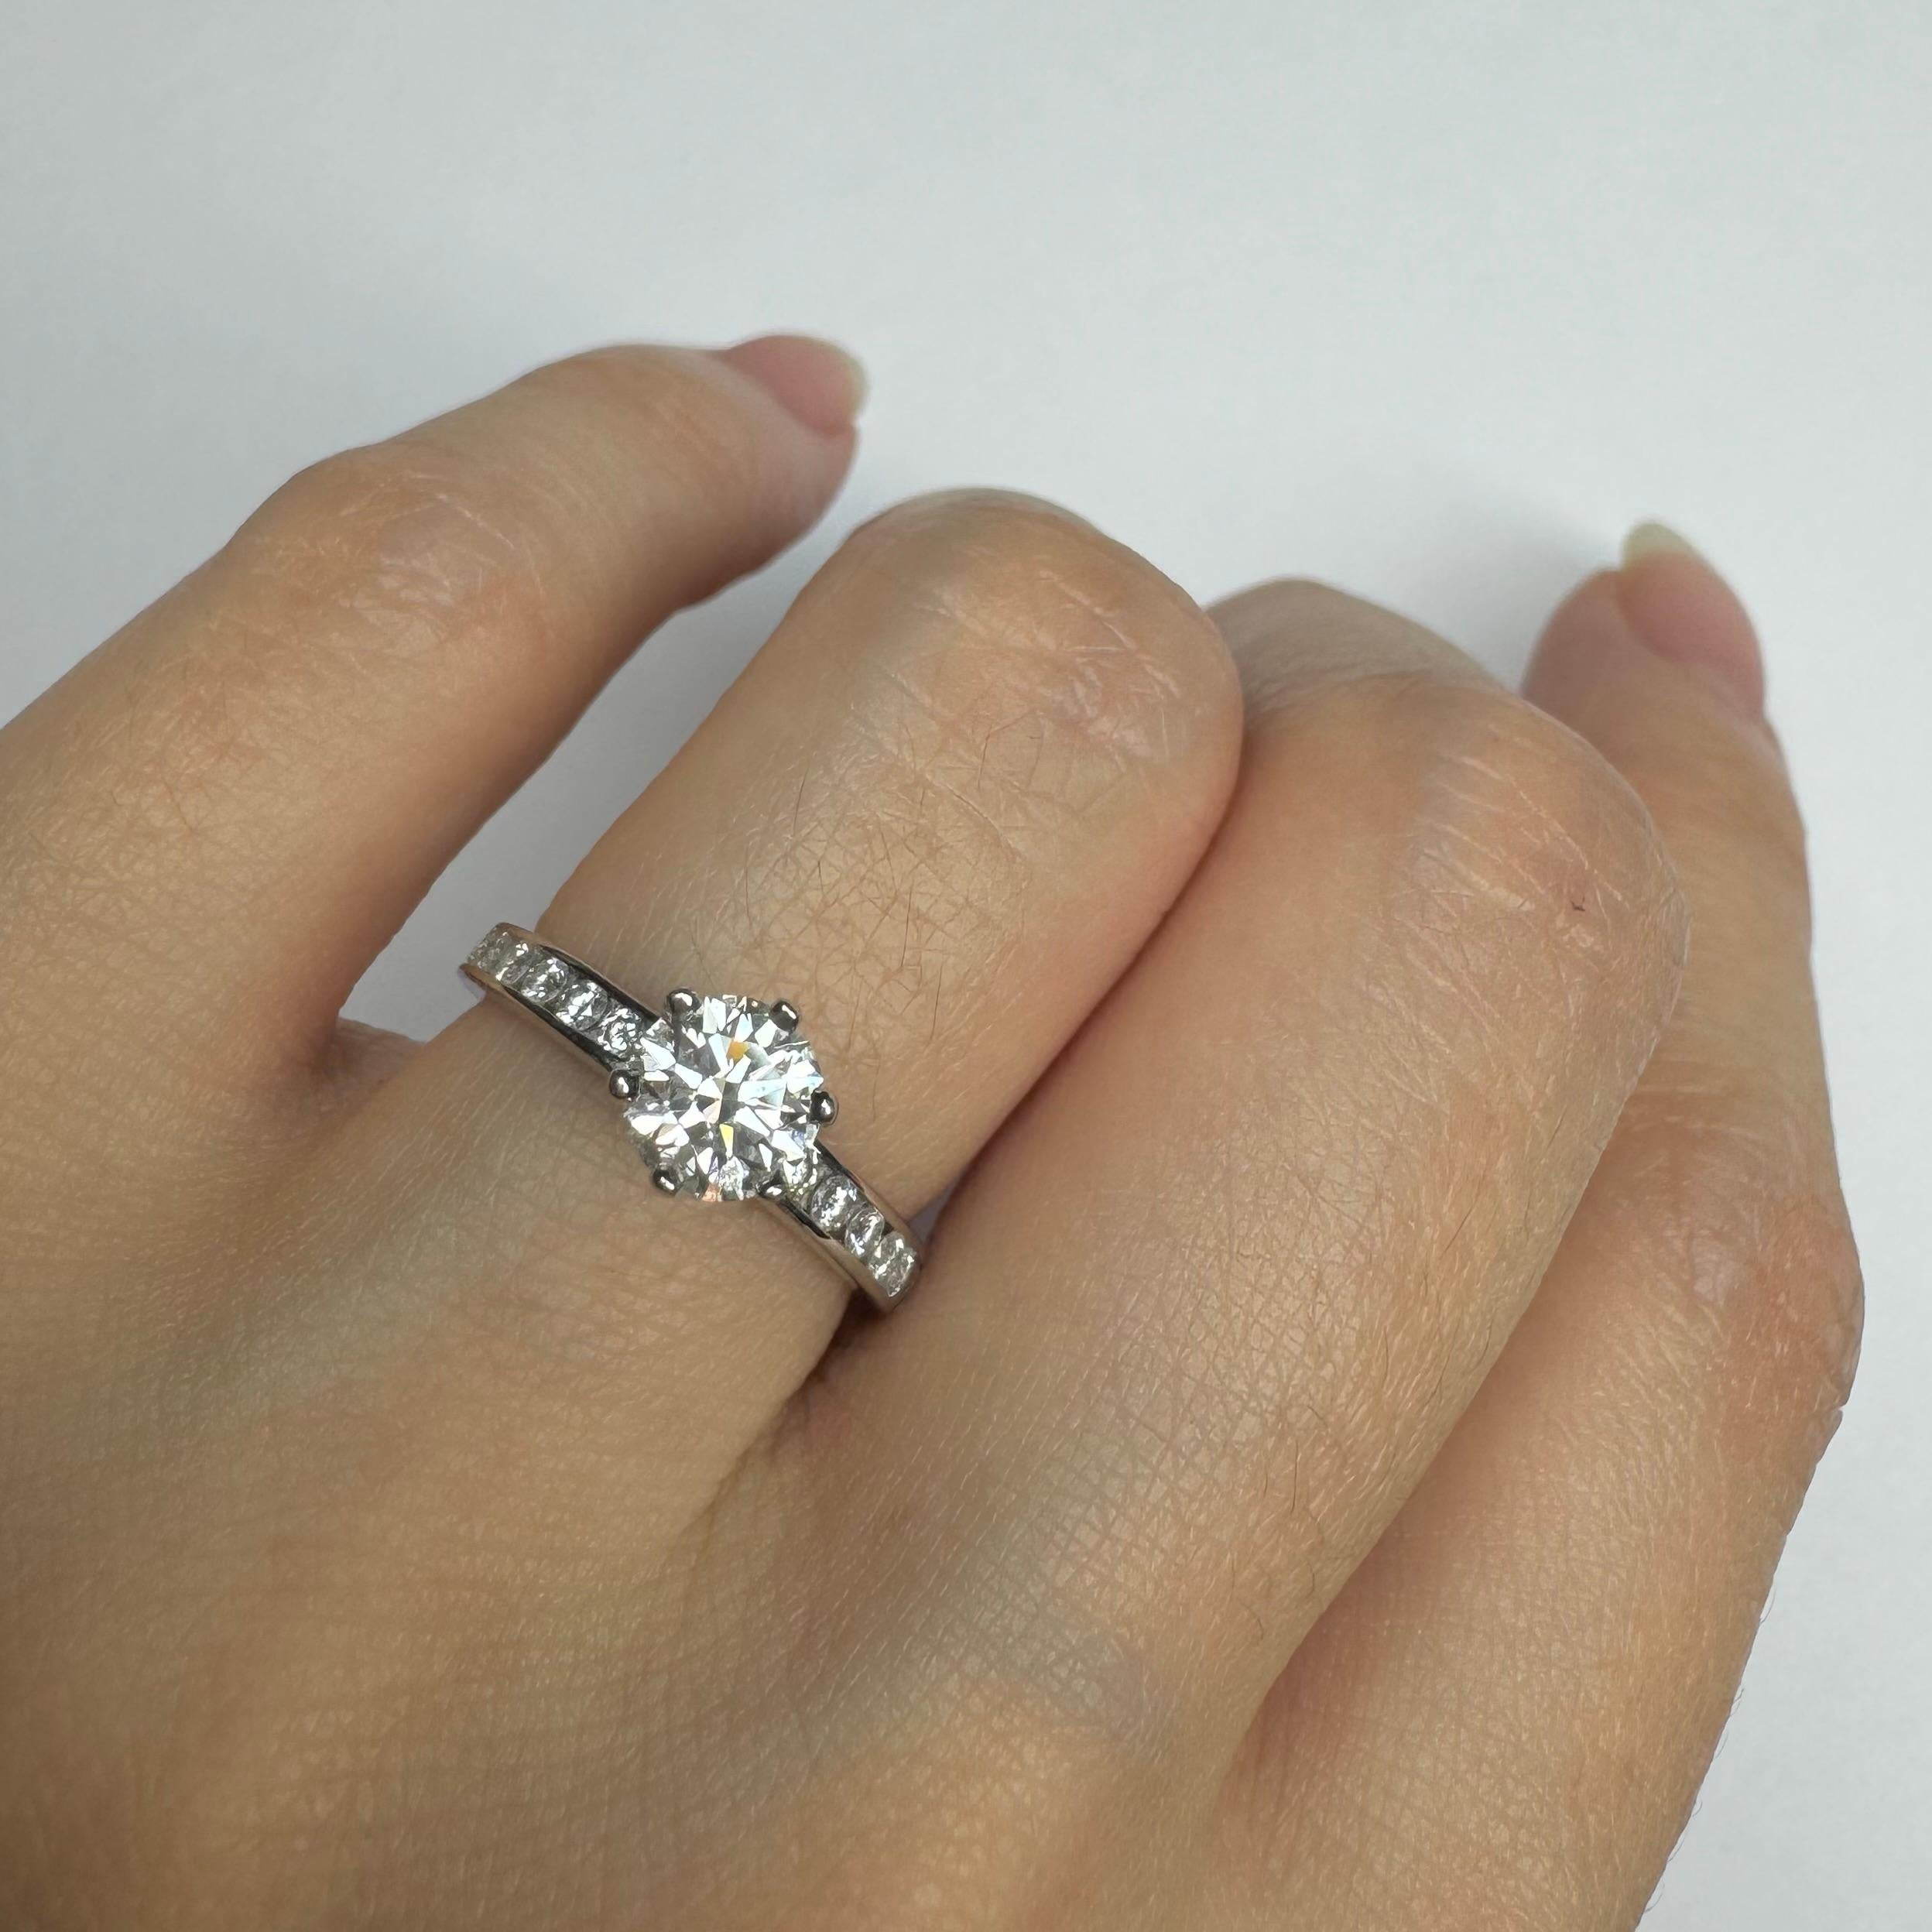 Tiffany & Co. 0.64ct Diamond Ring For Sale 2